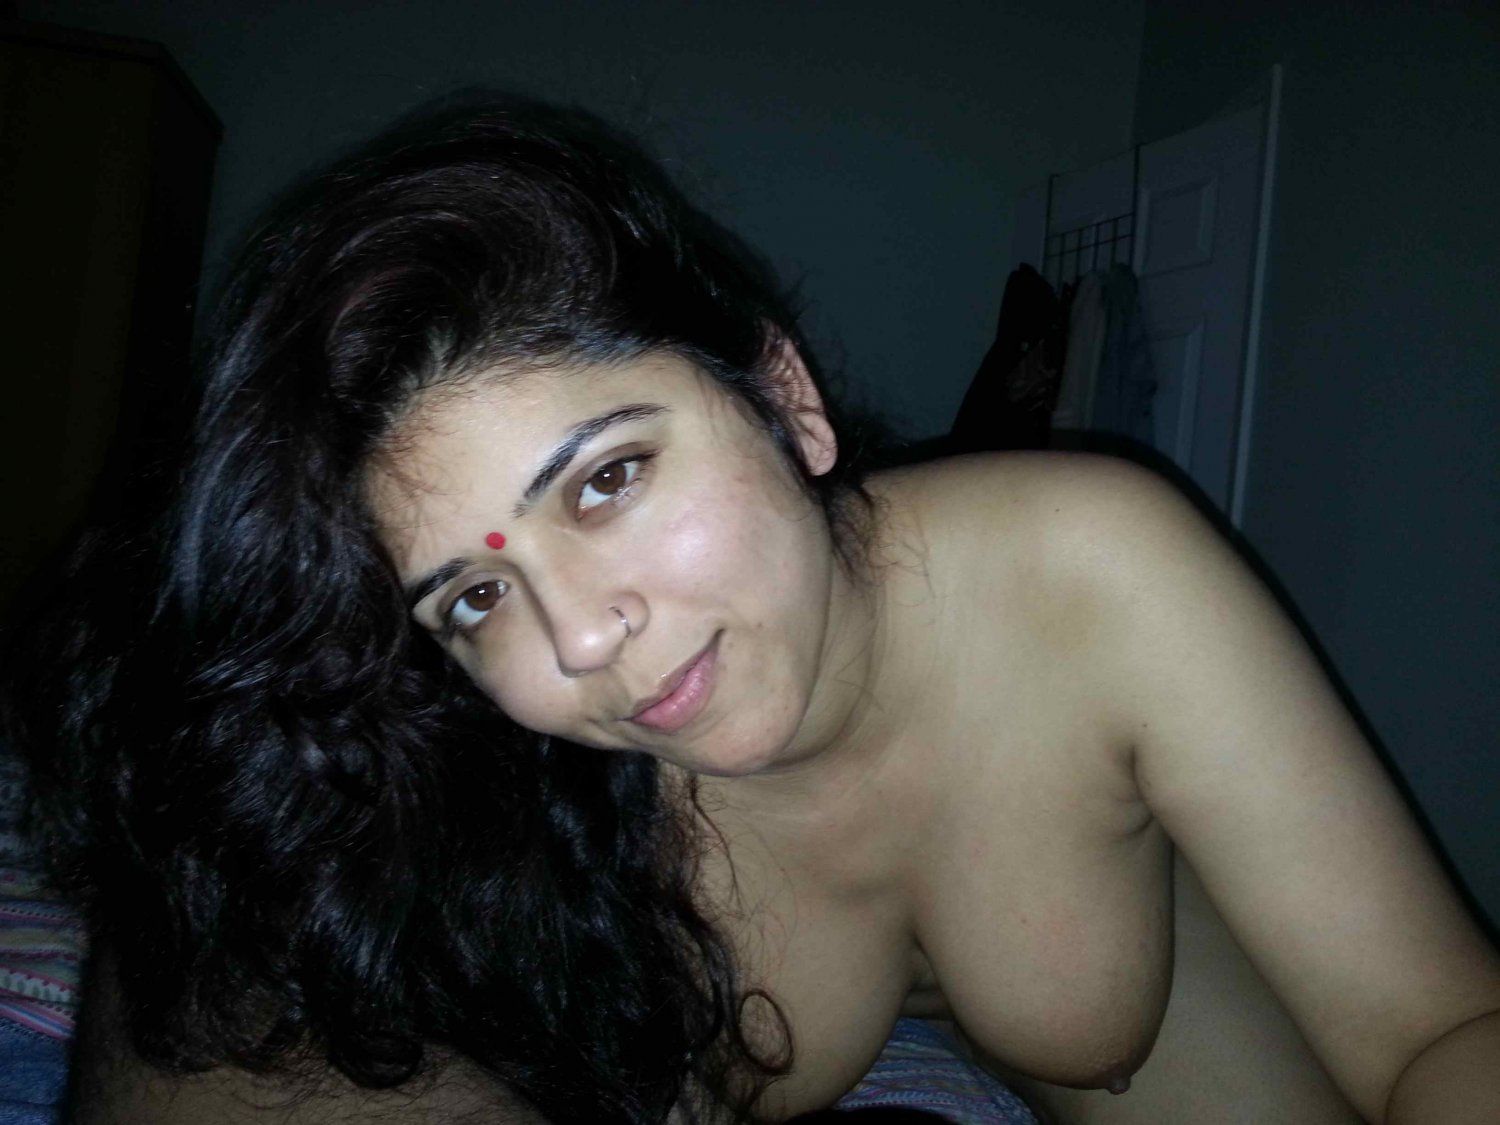 Hot indian wife - Porn Videos and Photos photo